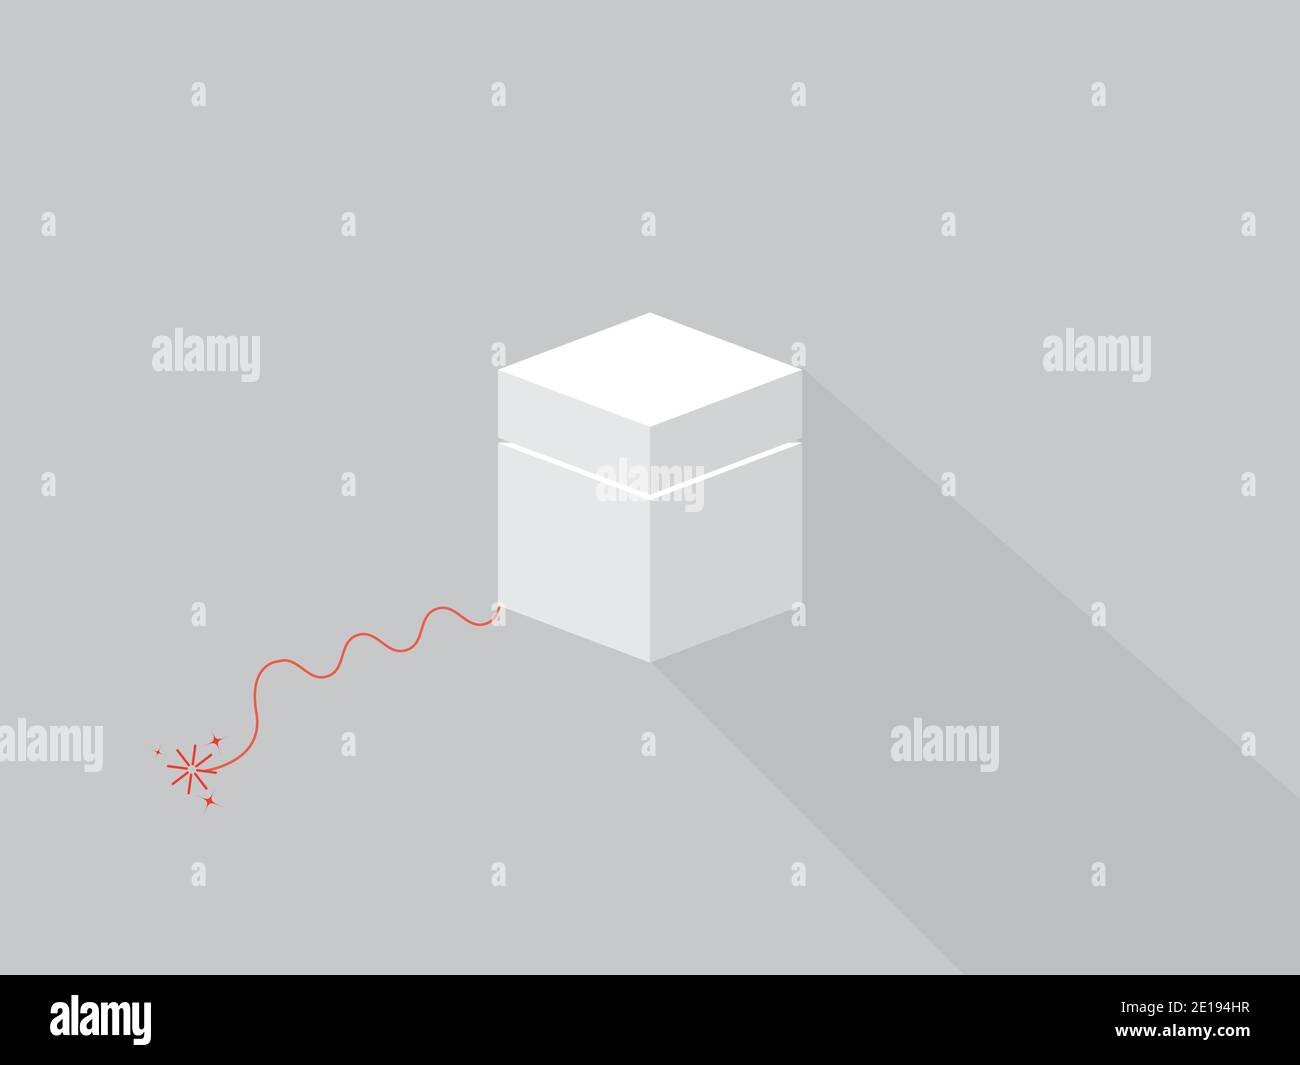 Square white box about to explode. The wick goes towards the white box with a fired wick. Stock Vector